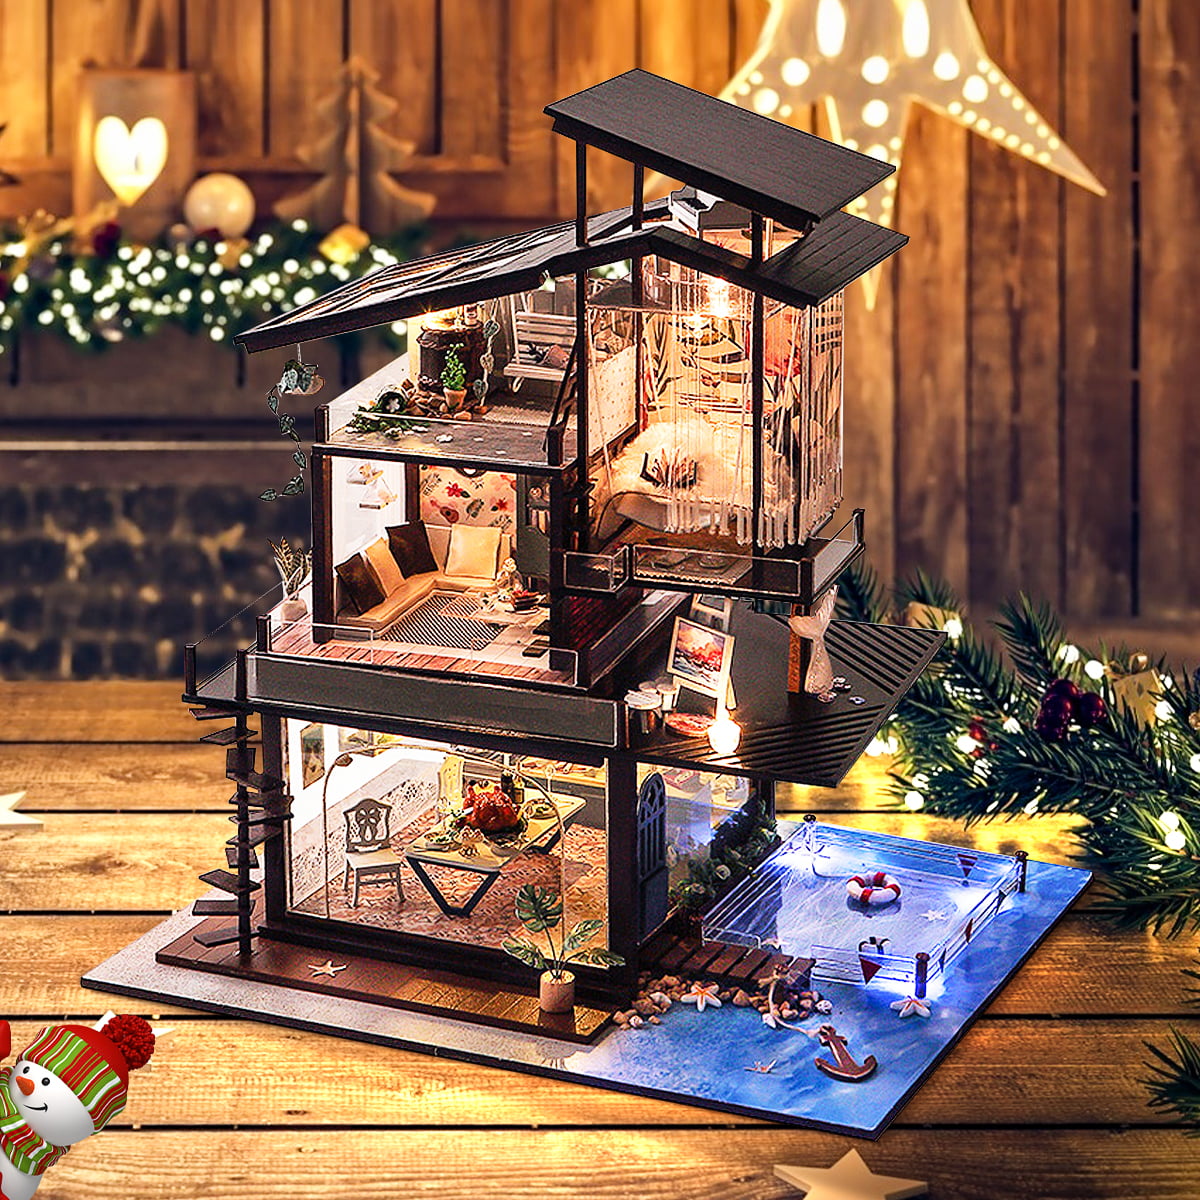 BEAUTYS CASTLE DIY Valencia Coastal Villa Wooden Dollhouses With LED Light And Wooden Frame For Creative Birthday Gift 